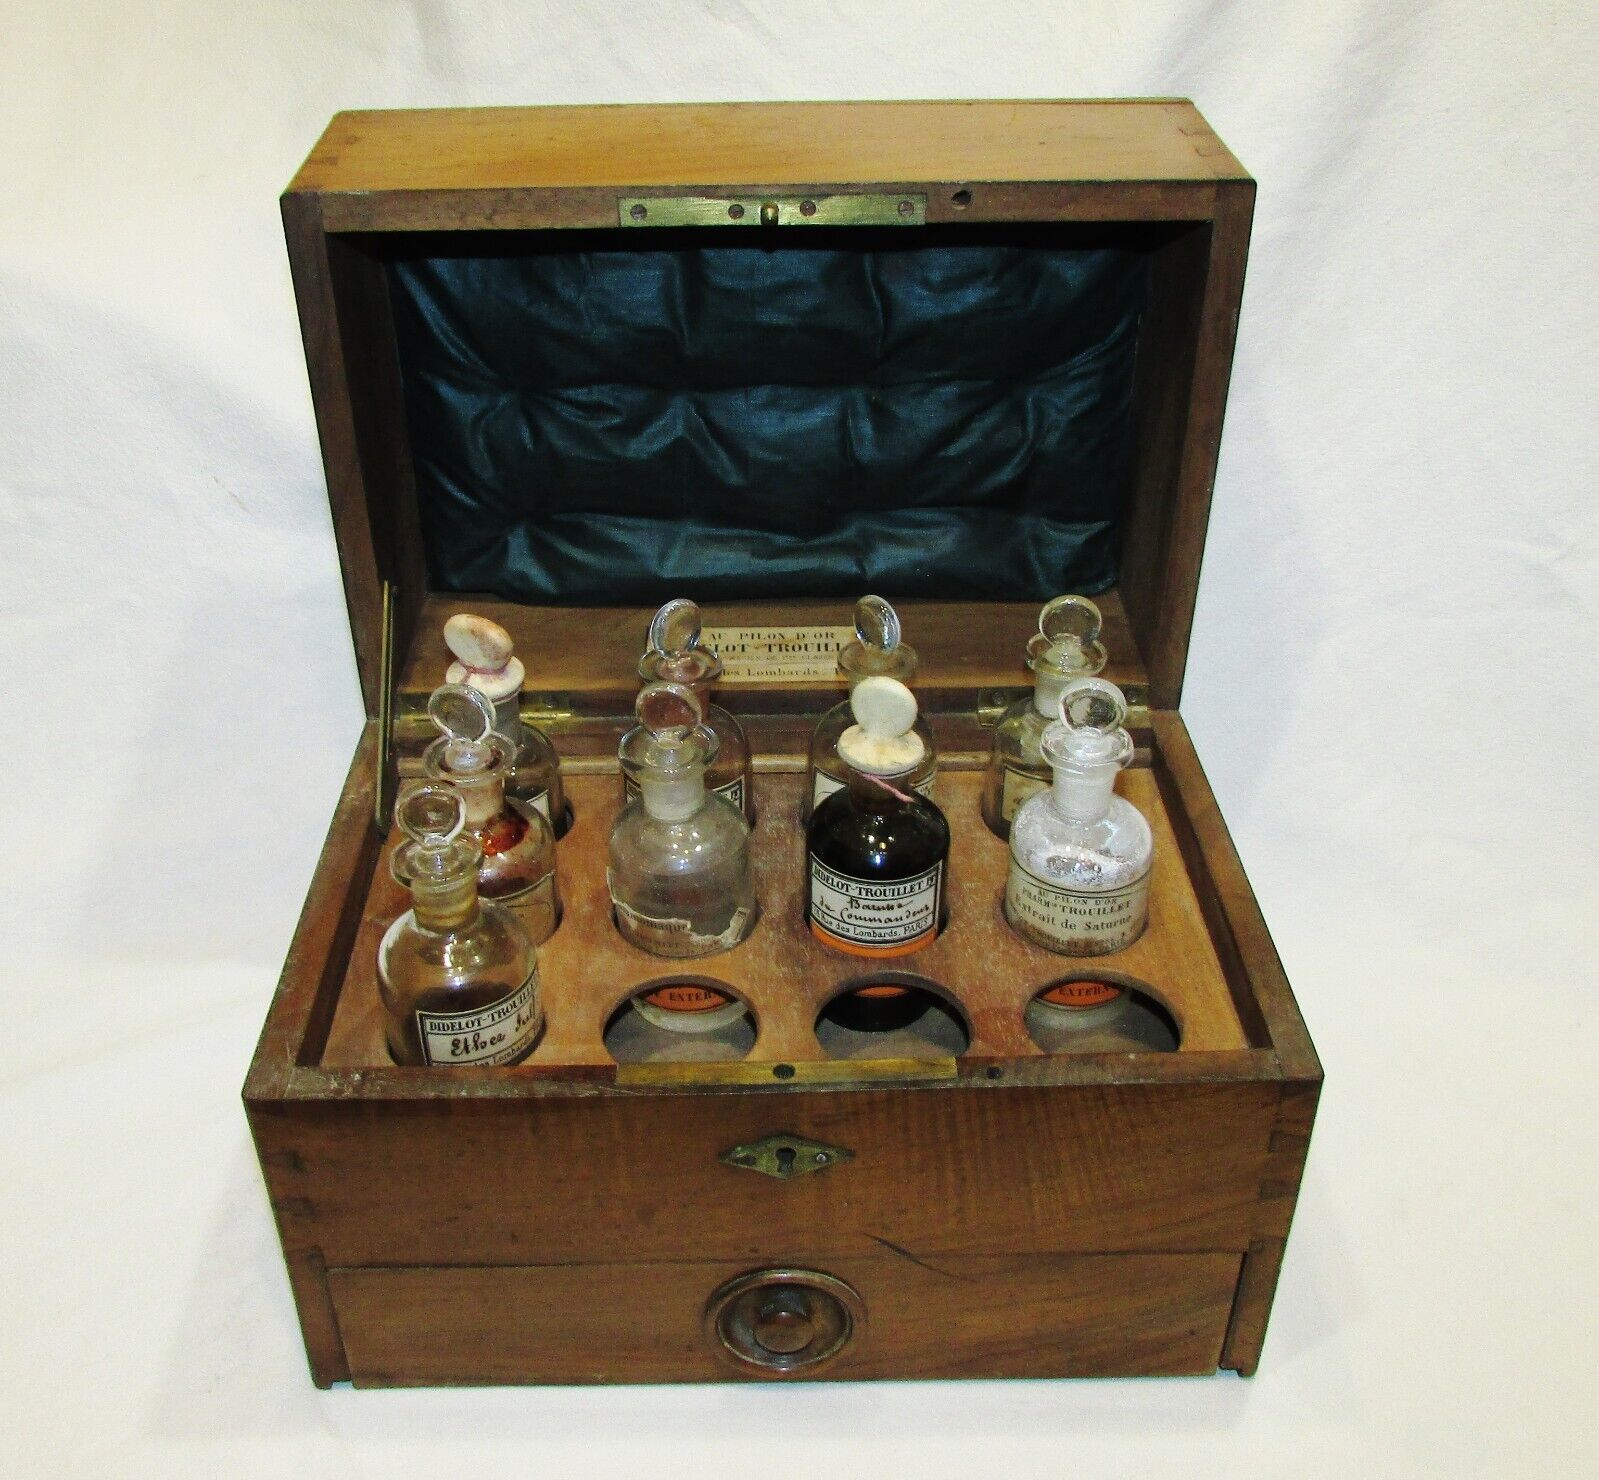 RARE ANTIQUE 19th Antique Pharmacy Wooden Box PHARMACY BOX WITH BOTTLES